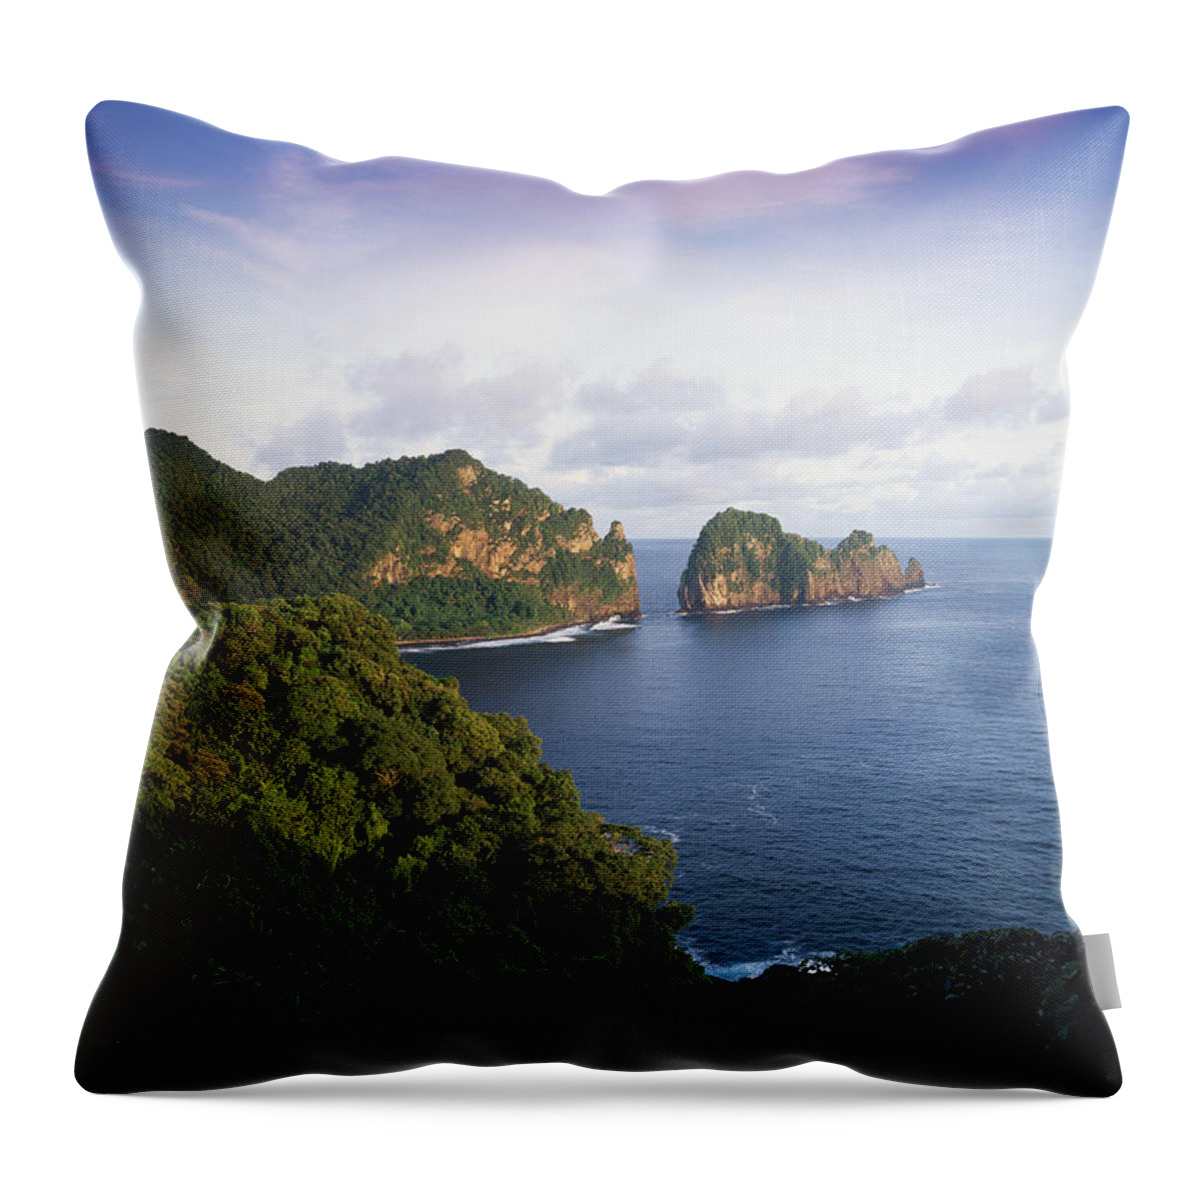 Blue Sky Throw Pillow featuring the photograph View Across The Southeastern Coastline by David Kirkland